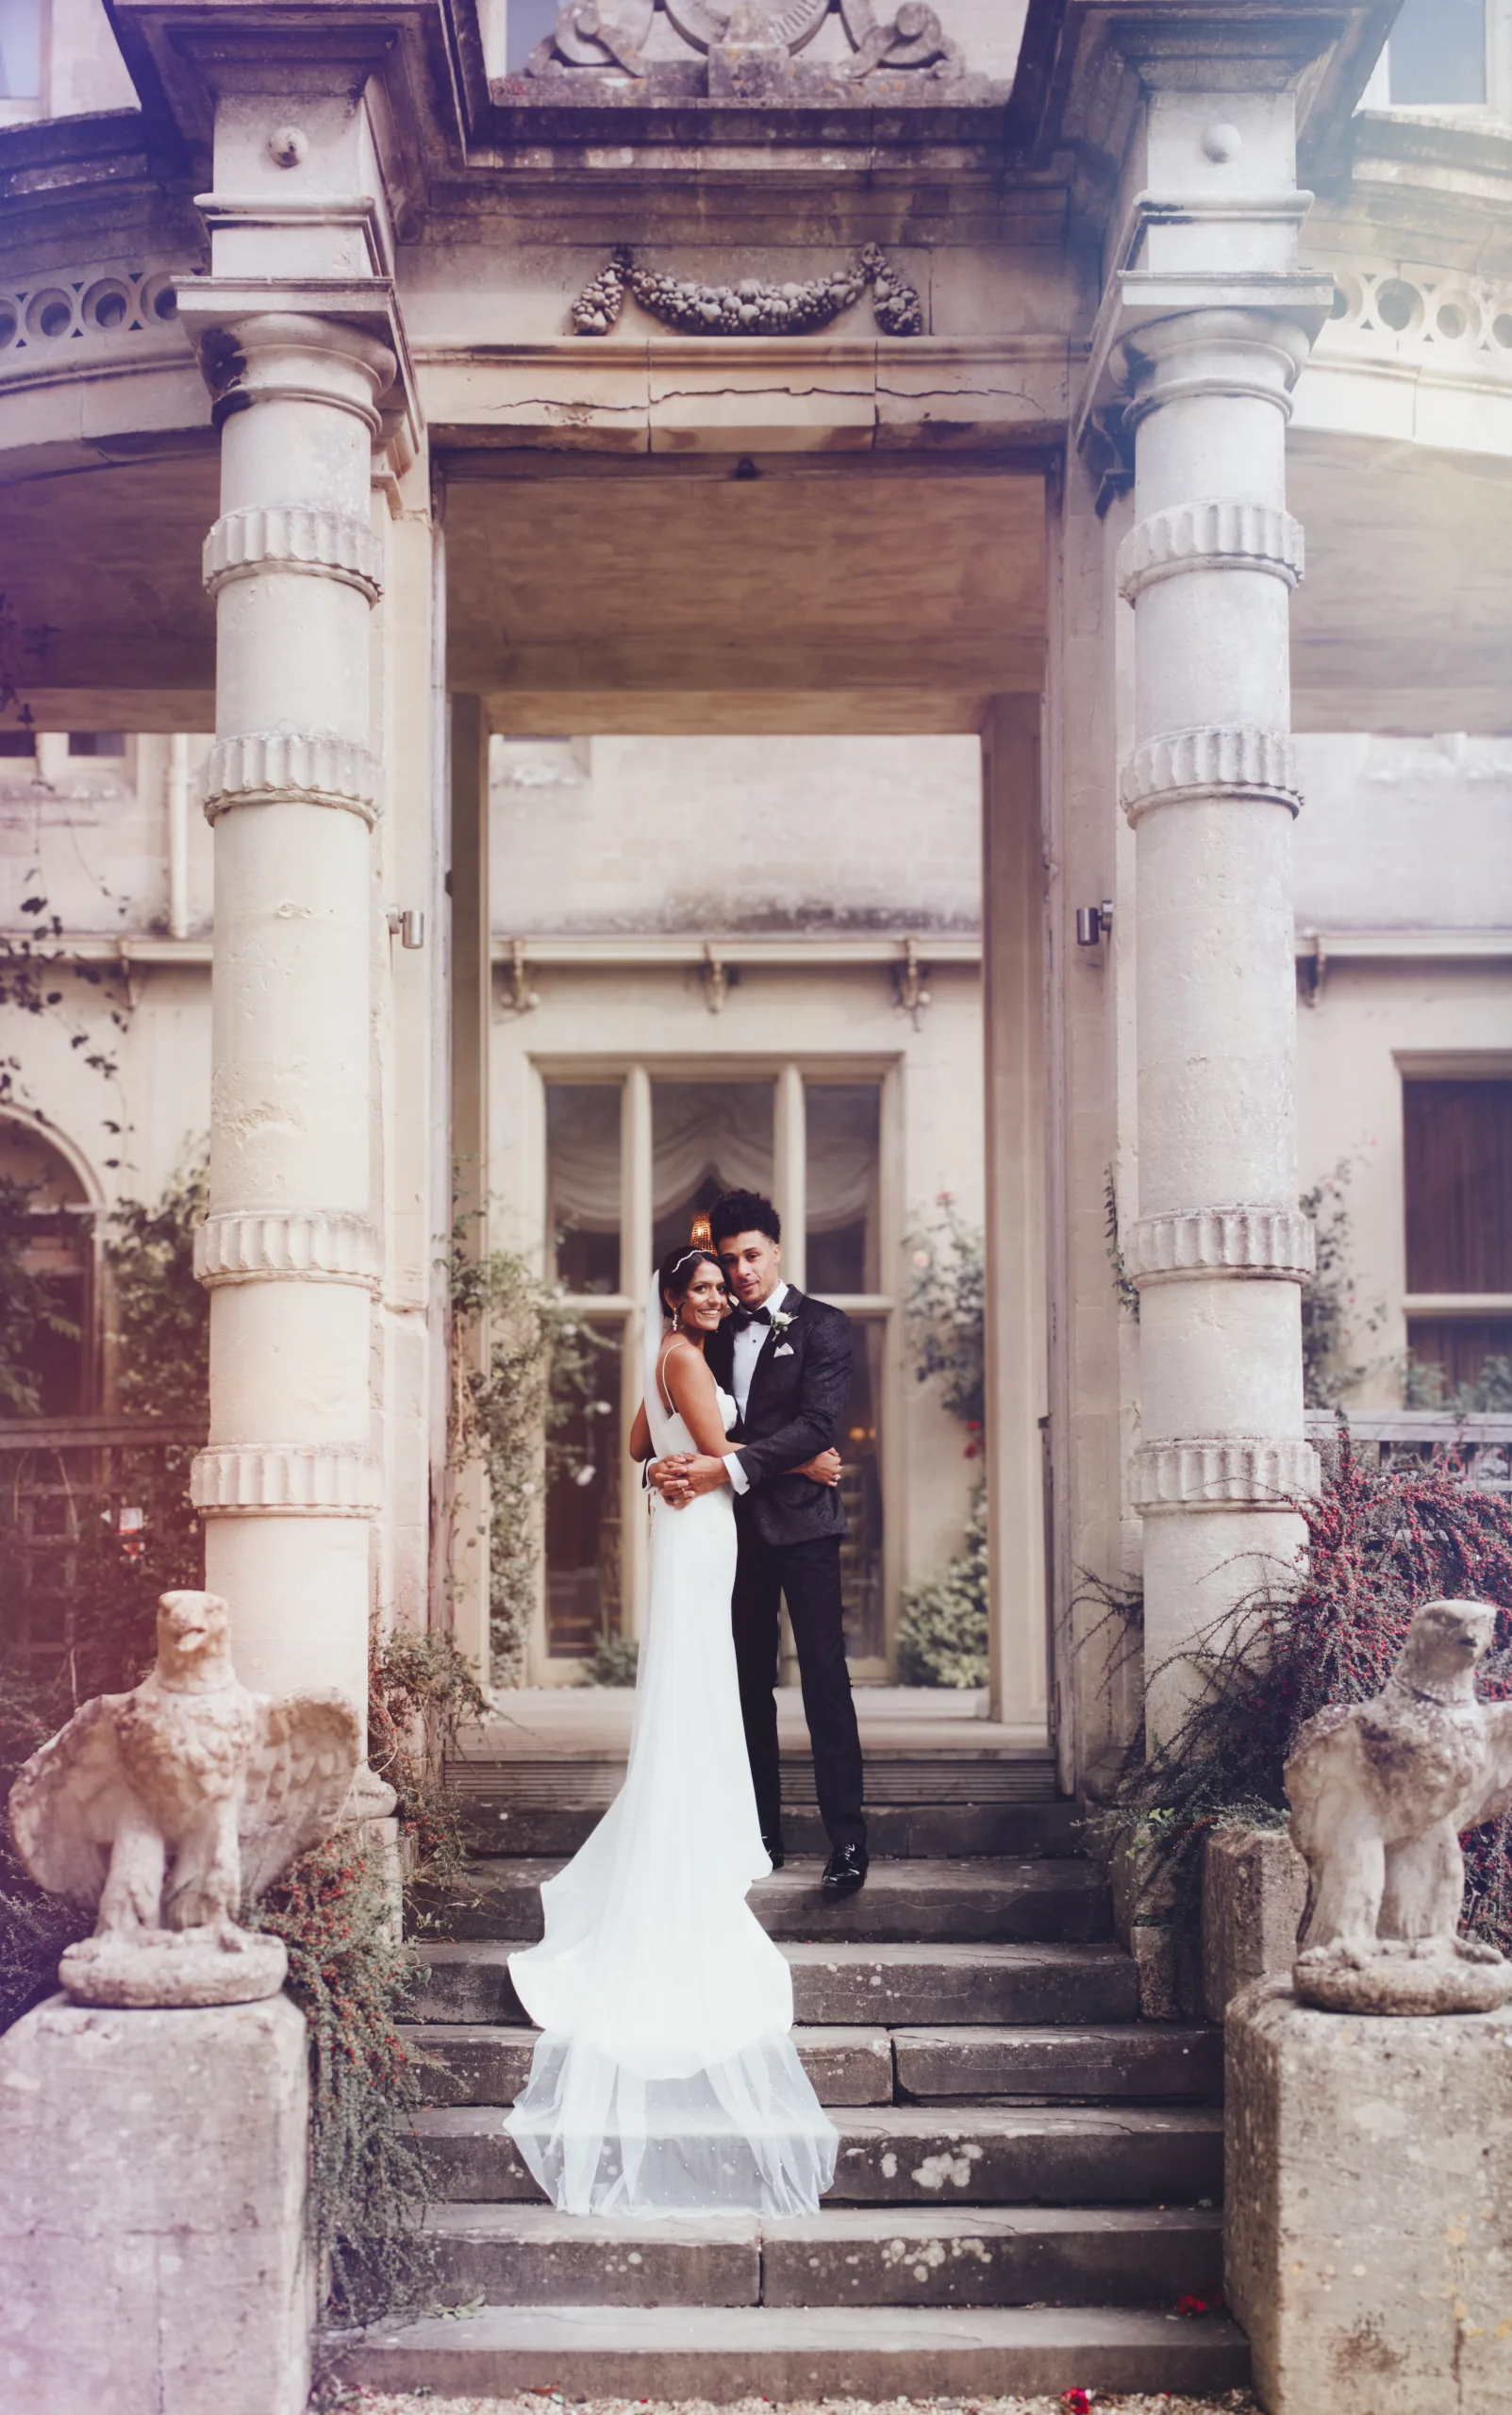 A bride and groom posing on the steps of an ornate building. Orchardleigh House Wedding Photographer